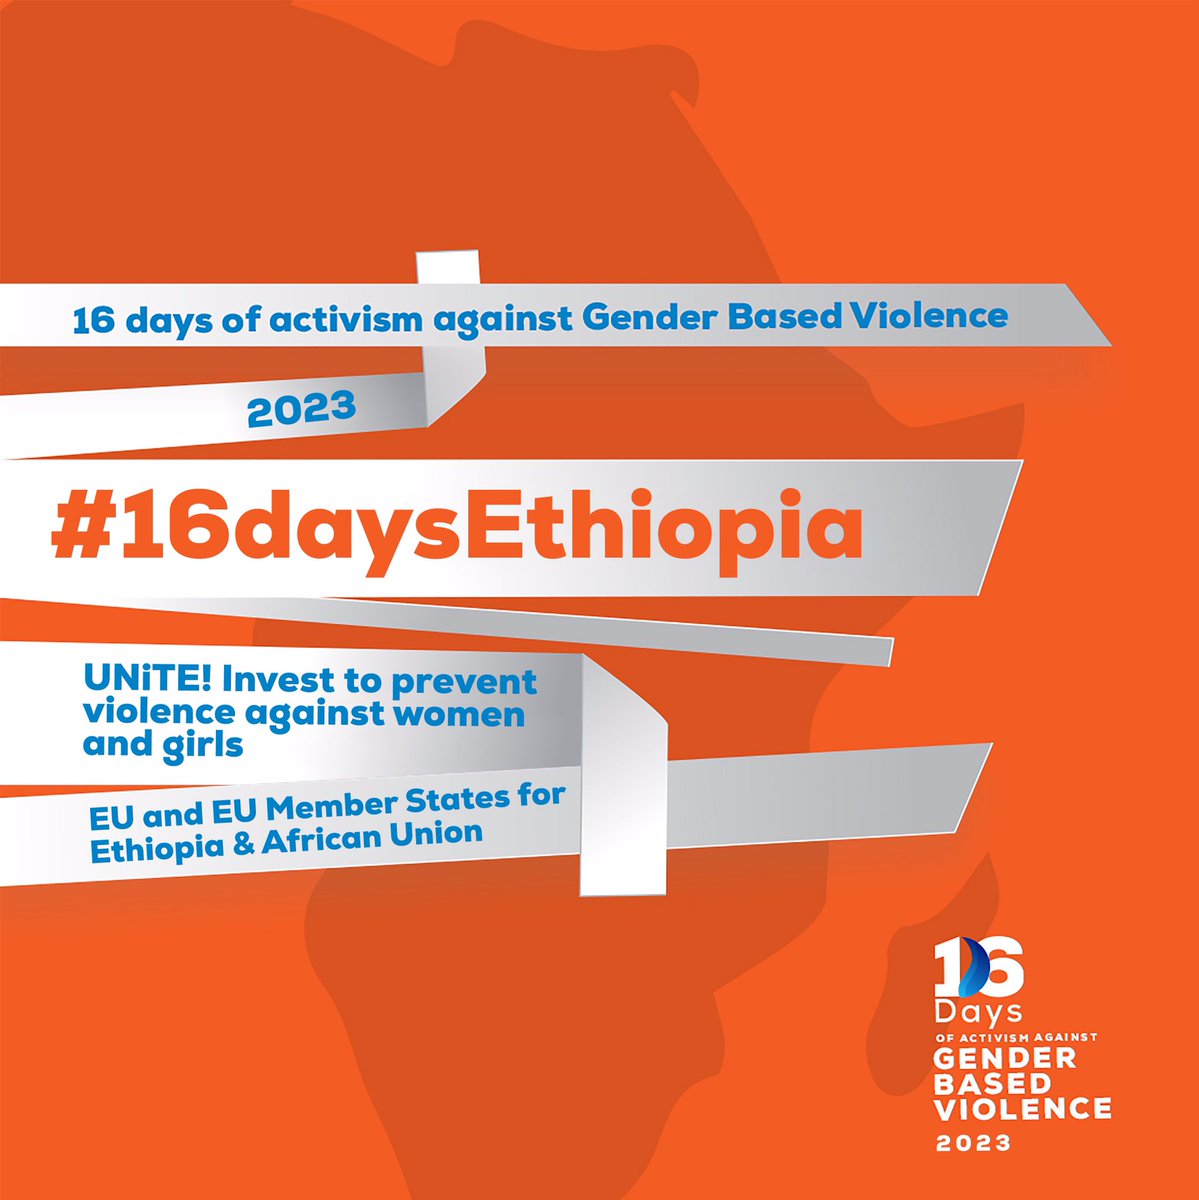 Violence against #women and #girls is the most pervasive breach of human rights worldwide!  On the #16Days of Activism against #GBV we fight against #GBV through #HumanRightsApproach #16daysEthiopia #NoExcuse @aics_it